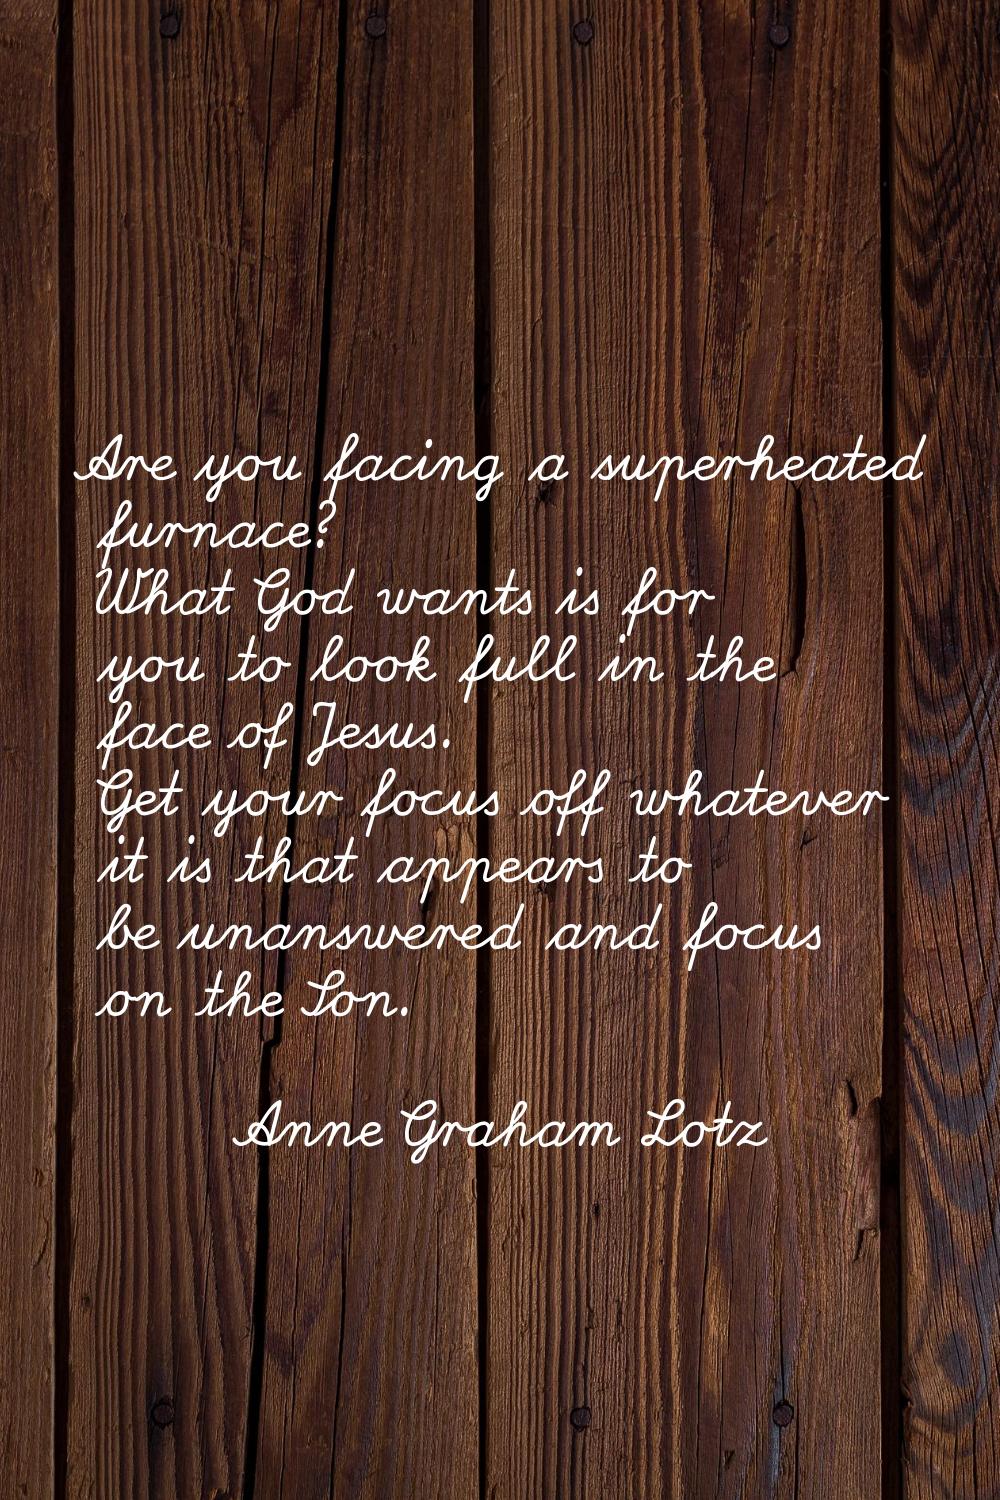 Are you facing a superheated furnace? What God wants is for you to look full in the face of Jesus. 